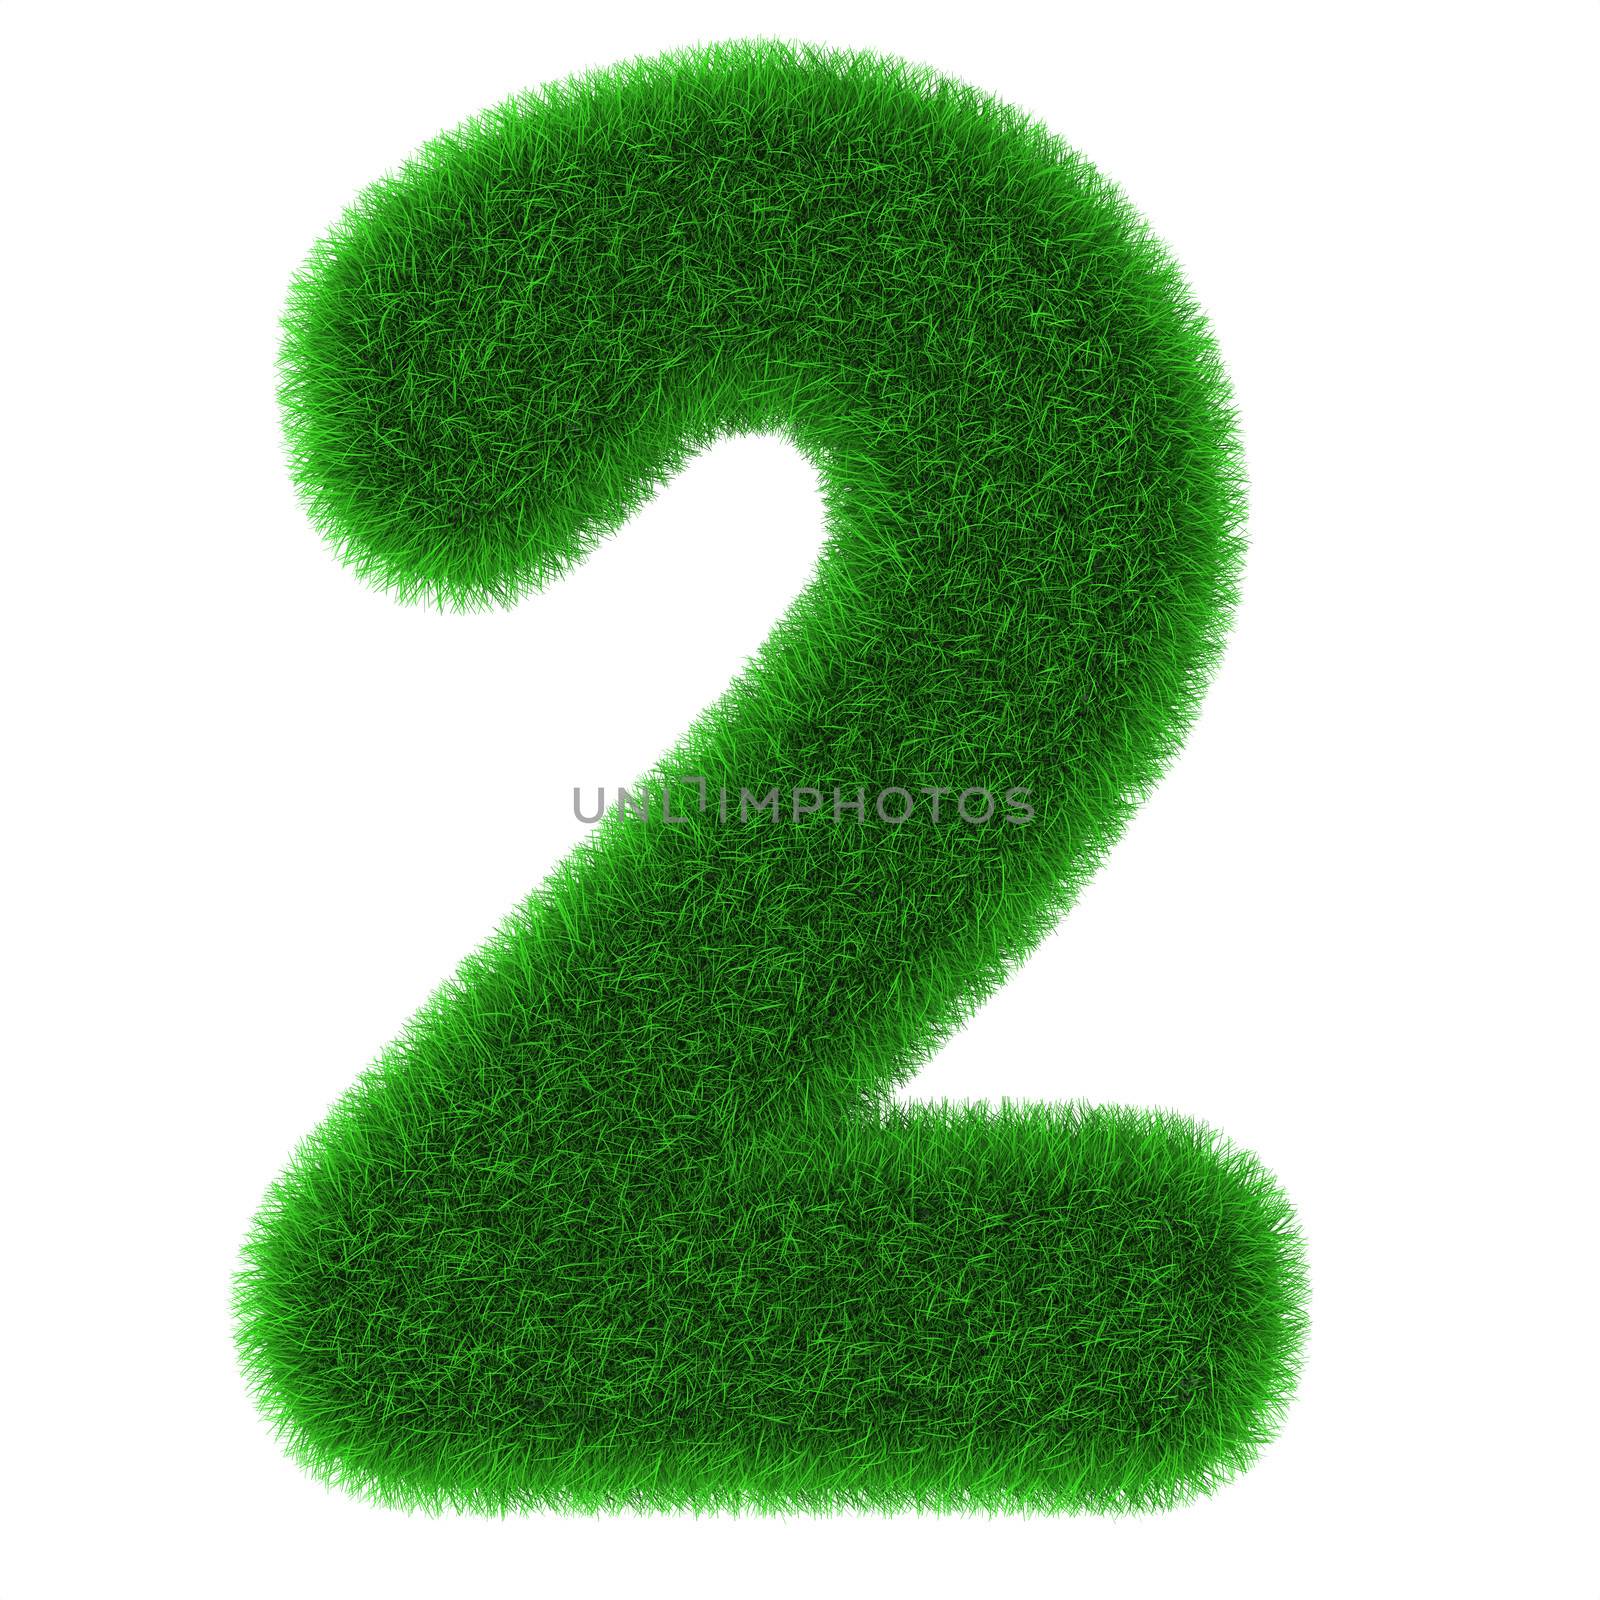 Number two covered by green grass isolated on white background